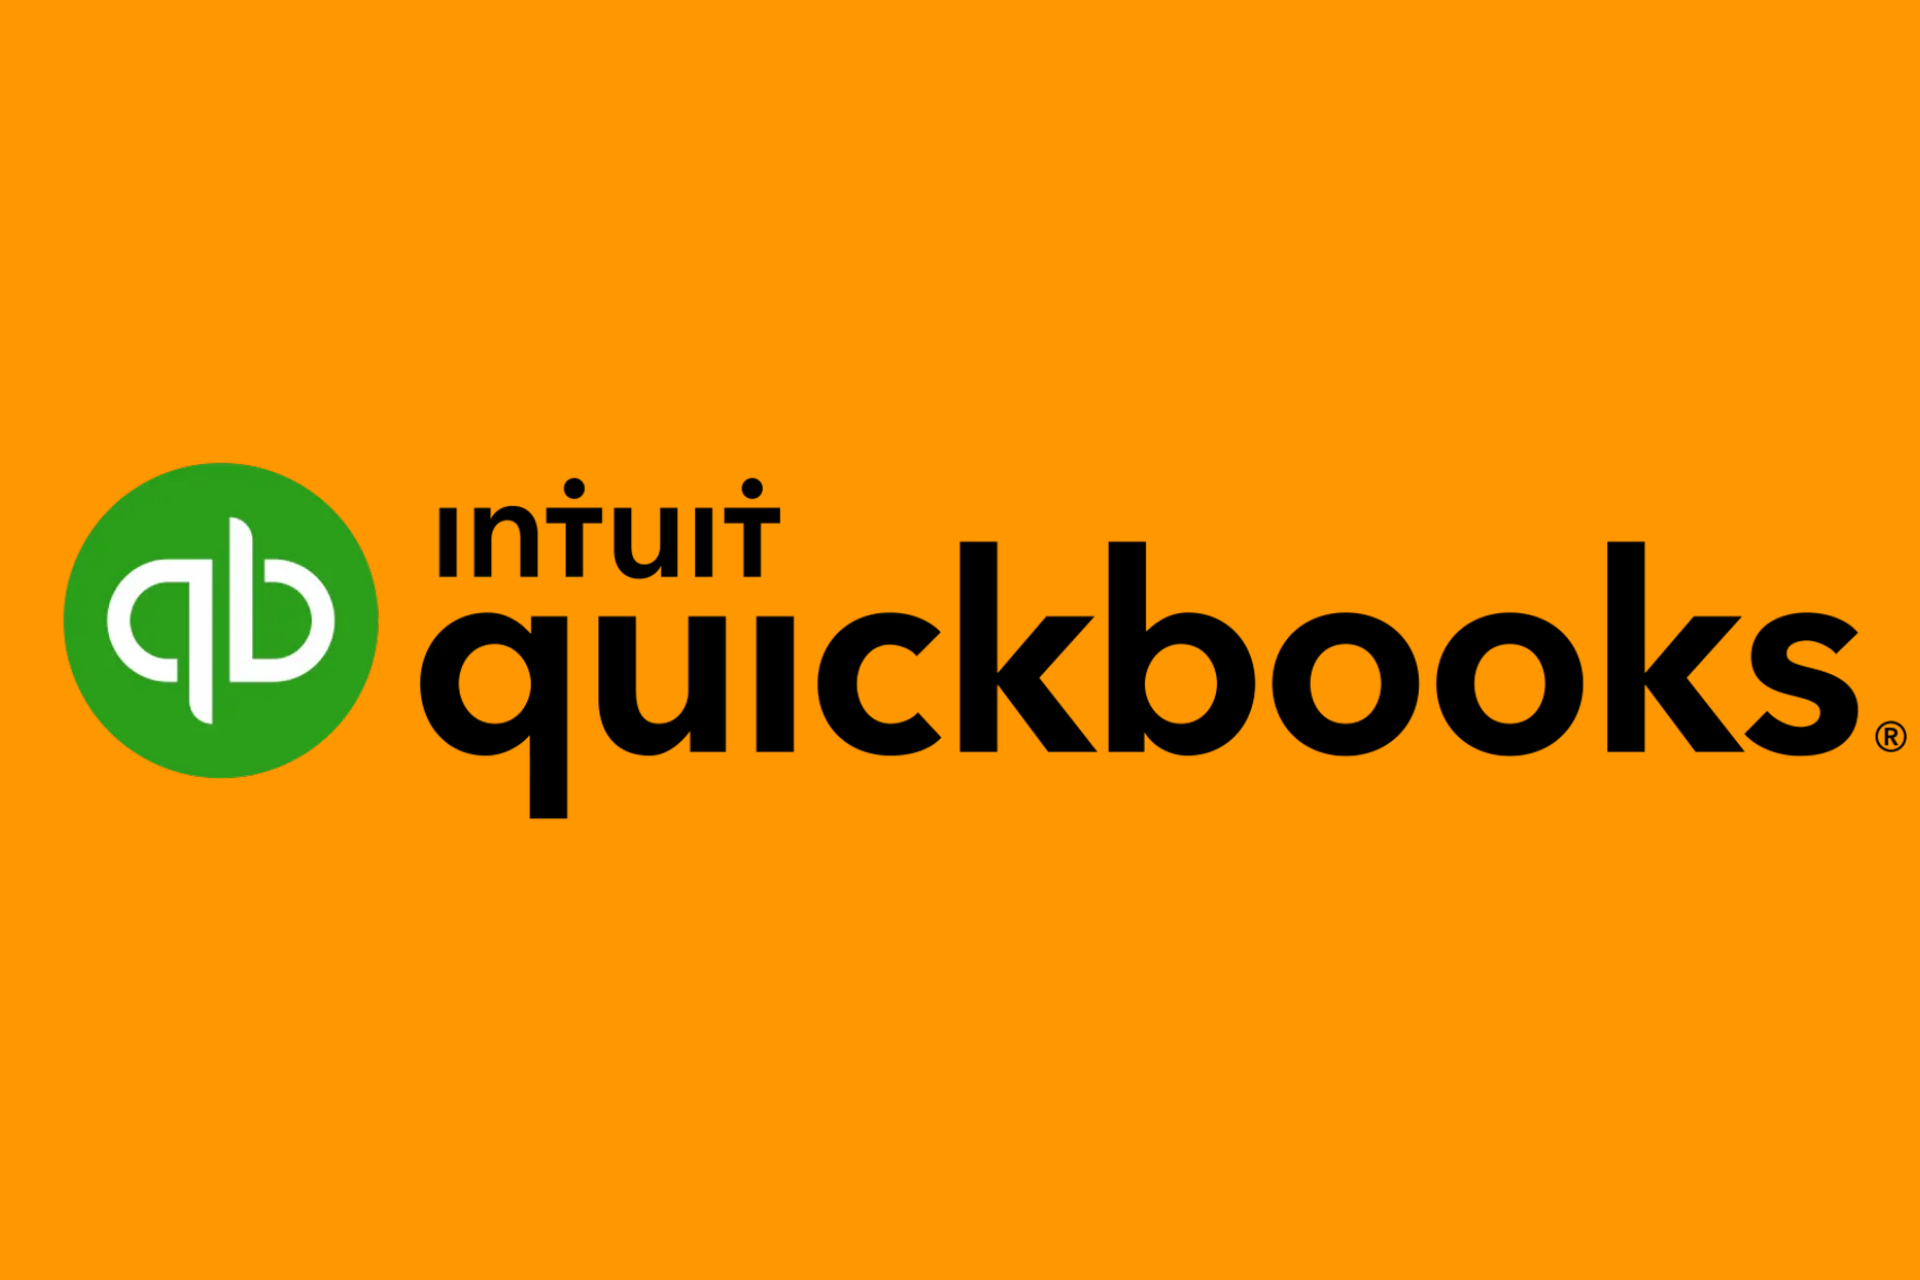 What are the best Quickbooks deals